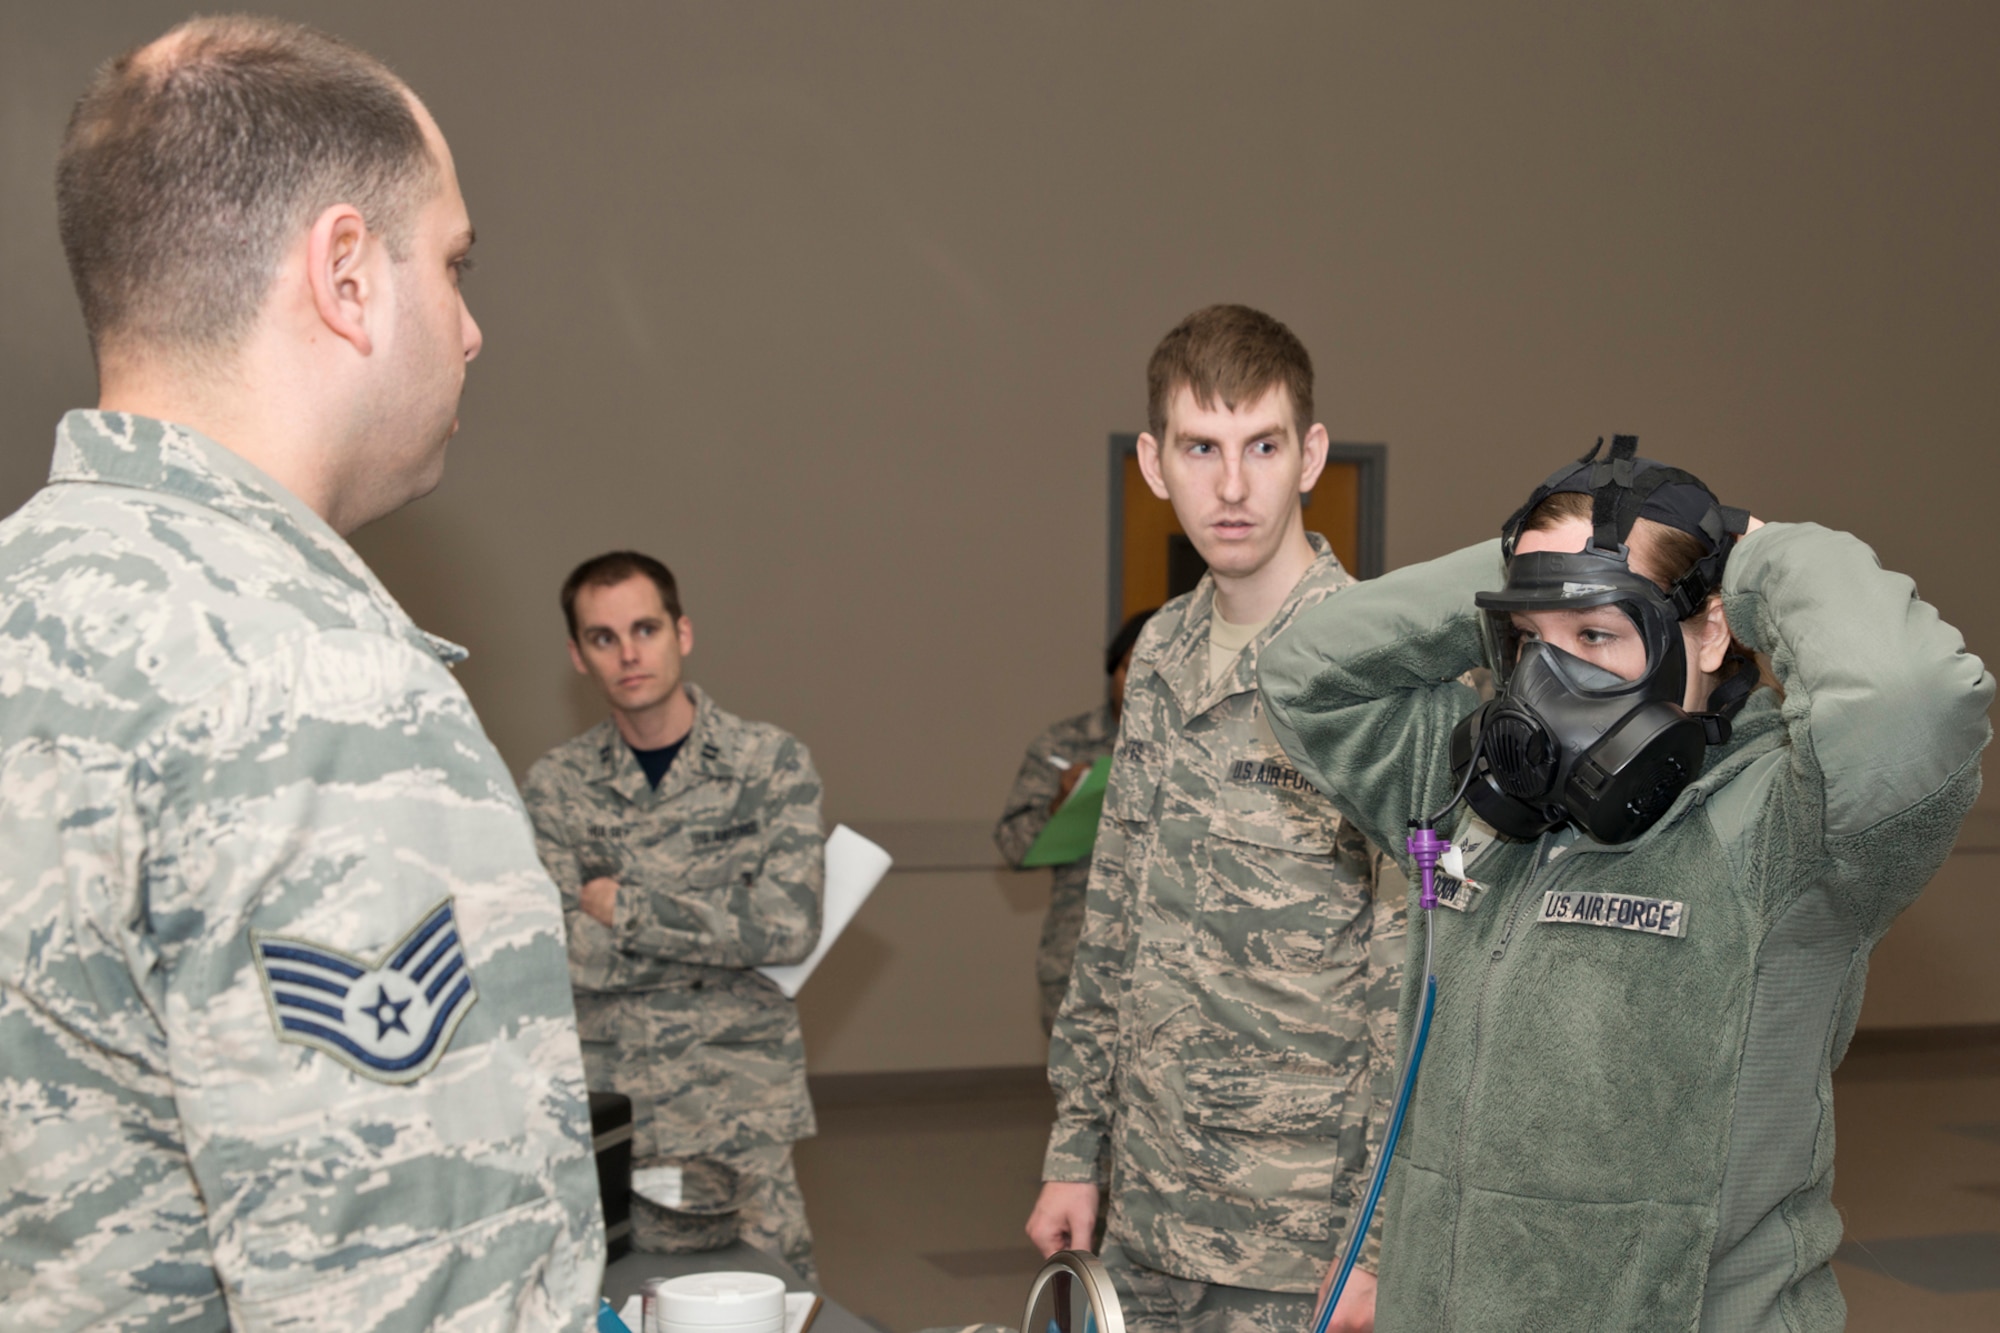 U.S. Air Force Staff Sgt. Kyle Love, 19th Medical Group bioenvironmental technician, conducts a gas mask fit test on Senior Airman Catherine Flocken, at Little Rock Air Force Base, Ark., Mar. 13, 2016. Flocken, who is an air transportation specialist assigned to the 96th Aerial Port Squadron, is completing one of the mandatory requirements for Reservists to be deployment capable.  (U.S. Air Force photo by Master Sgt. Jeff Walston/Released)